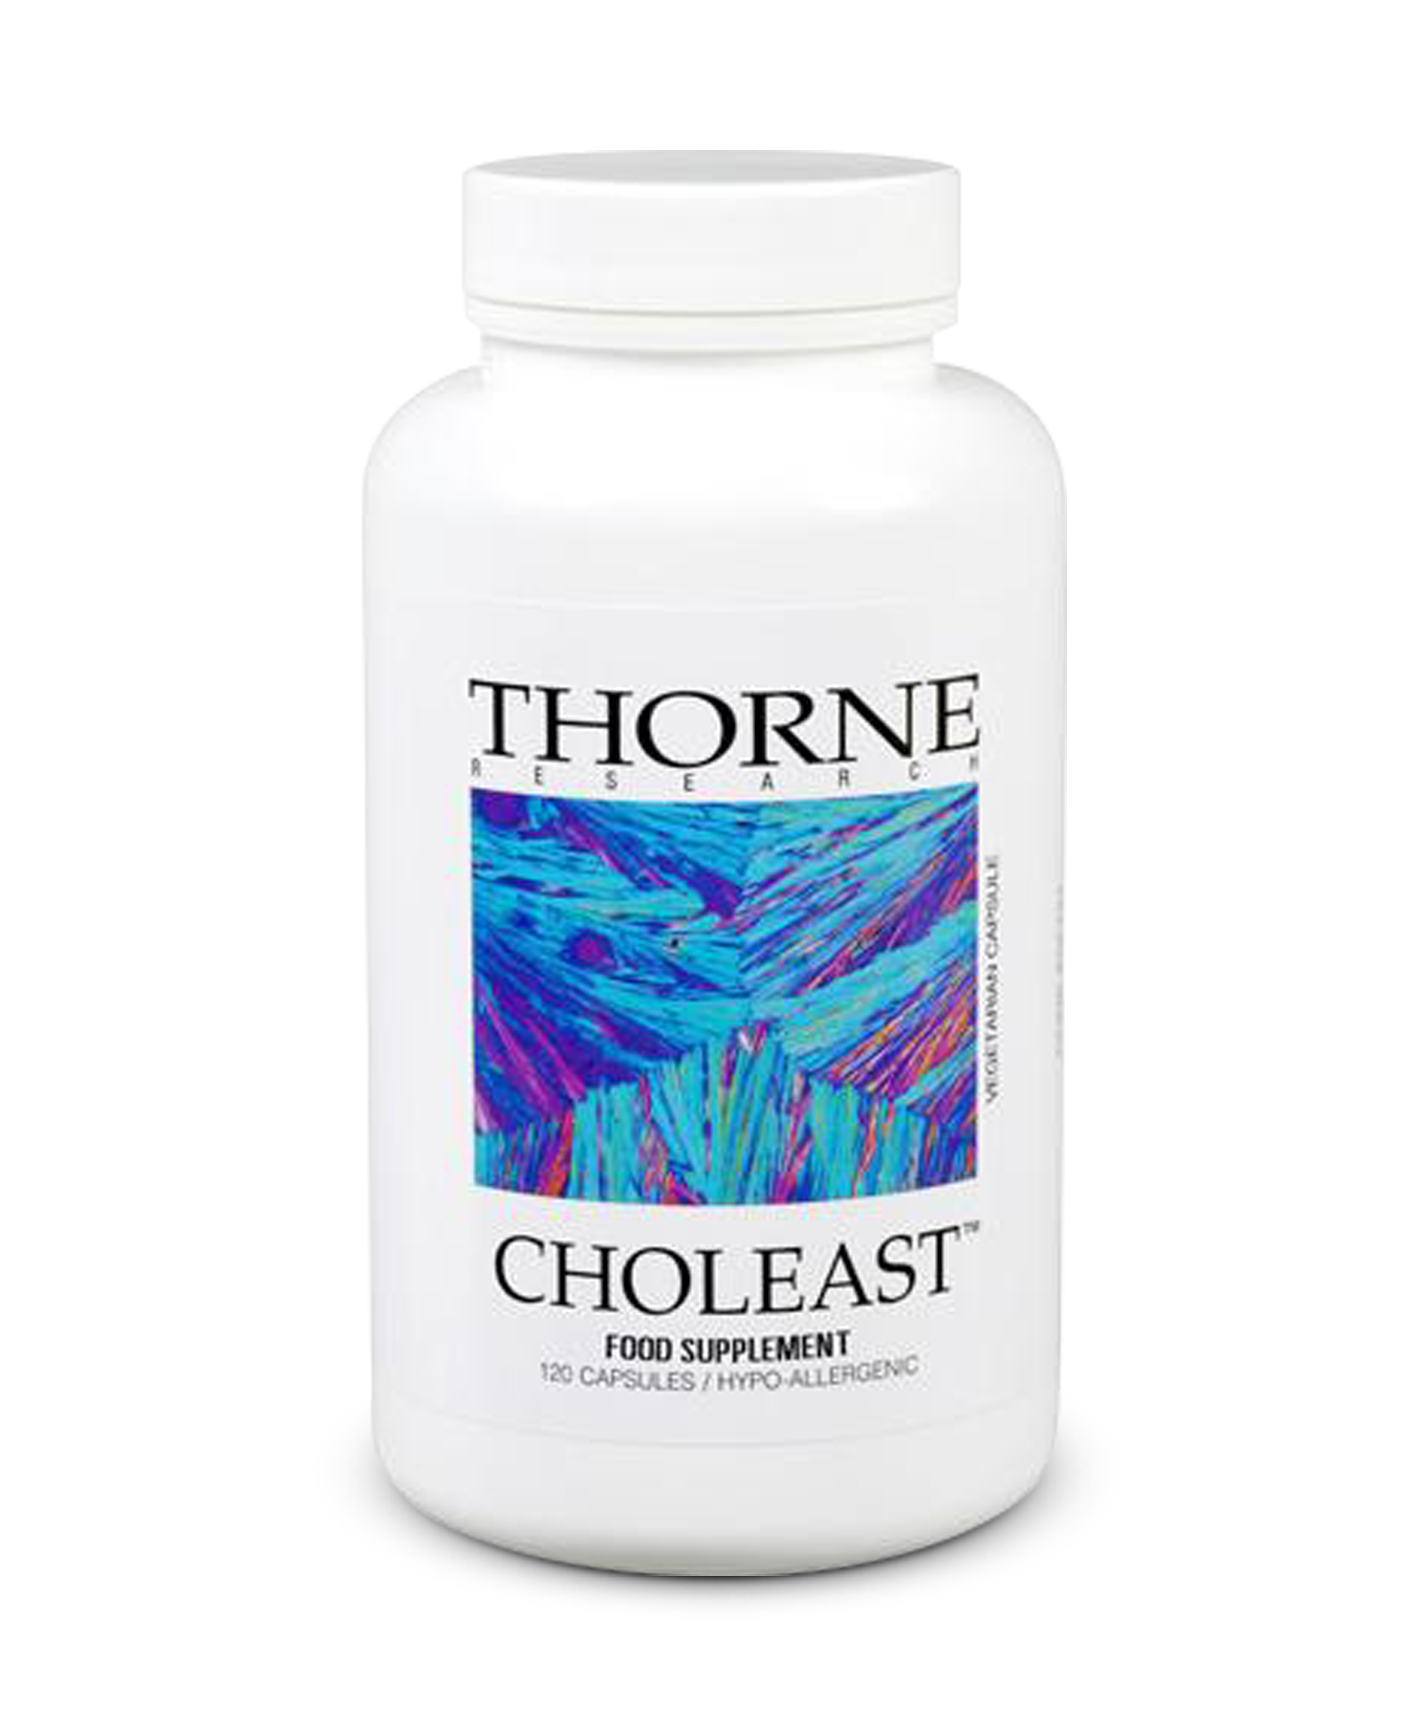 Choleast- cholesterol support